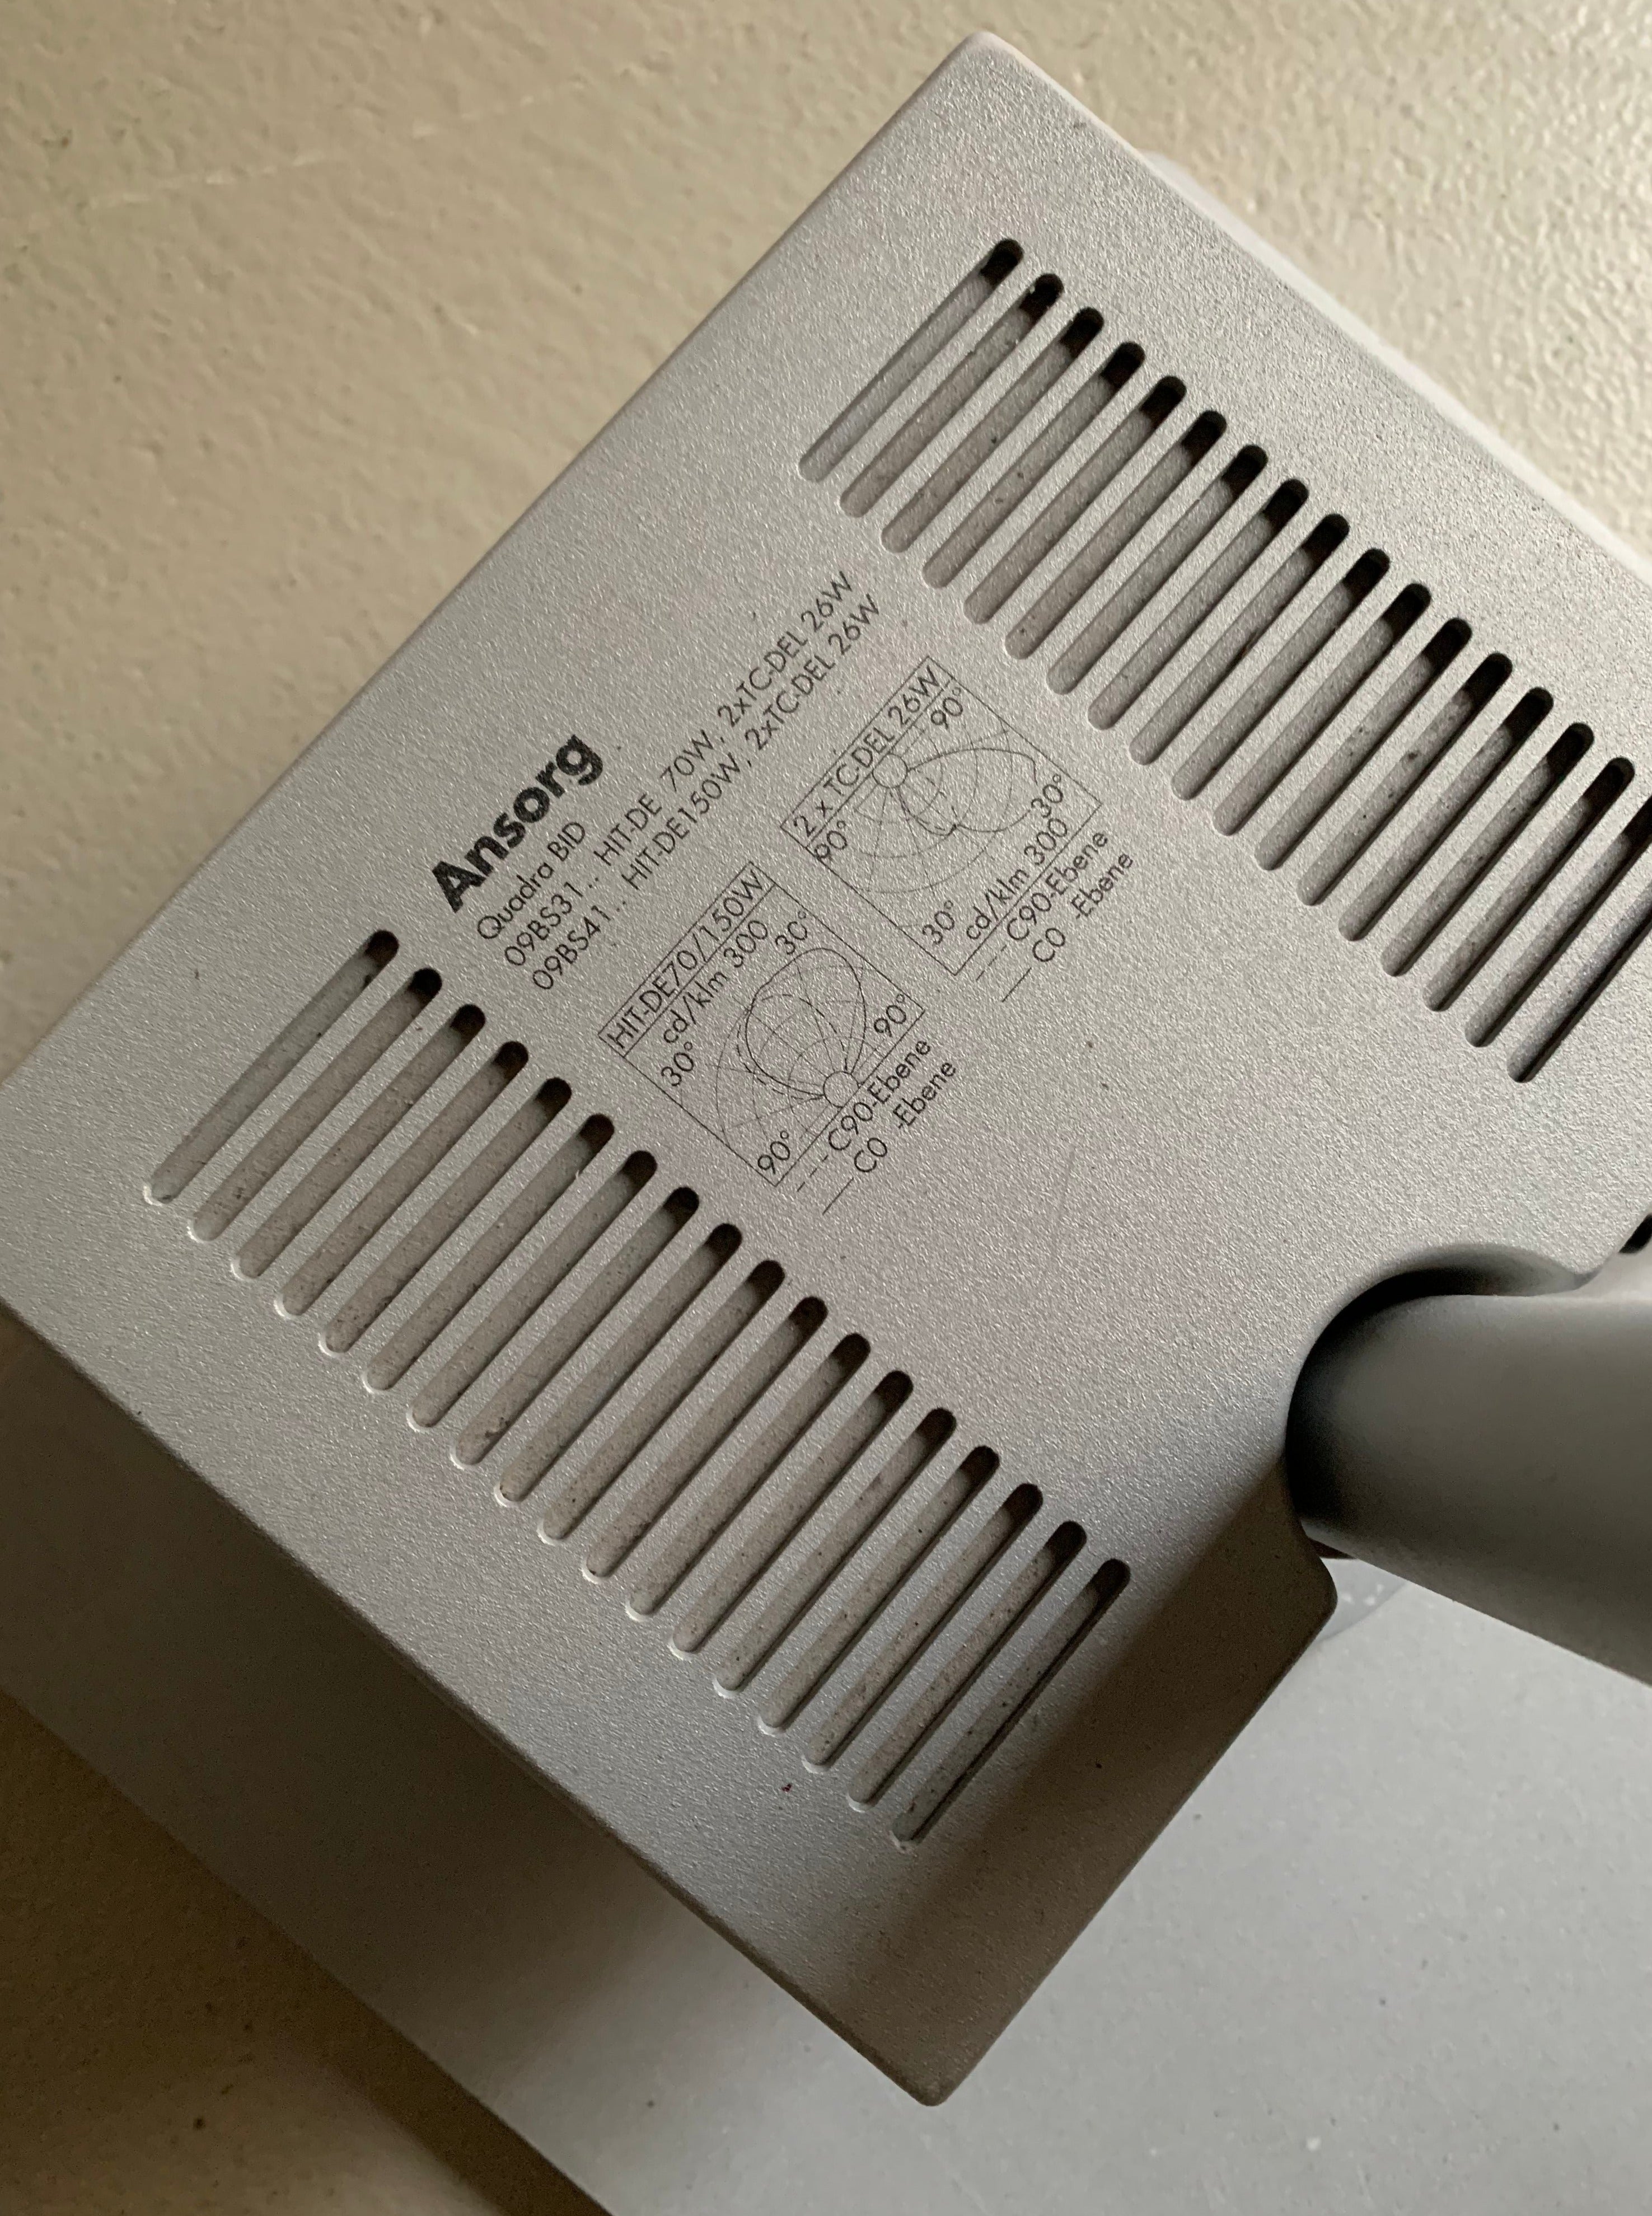 Close-up of a grey electronic device stamped with the brand "Veter Vintage", featuring technical diagrams and text, including serial numbers and compliance marks for the Postmodern Metal Lamp by Glen Oliver Löw and Antonio Citterio for Ansorg | 1990s system, viewed at an angle.